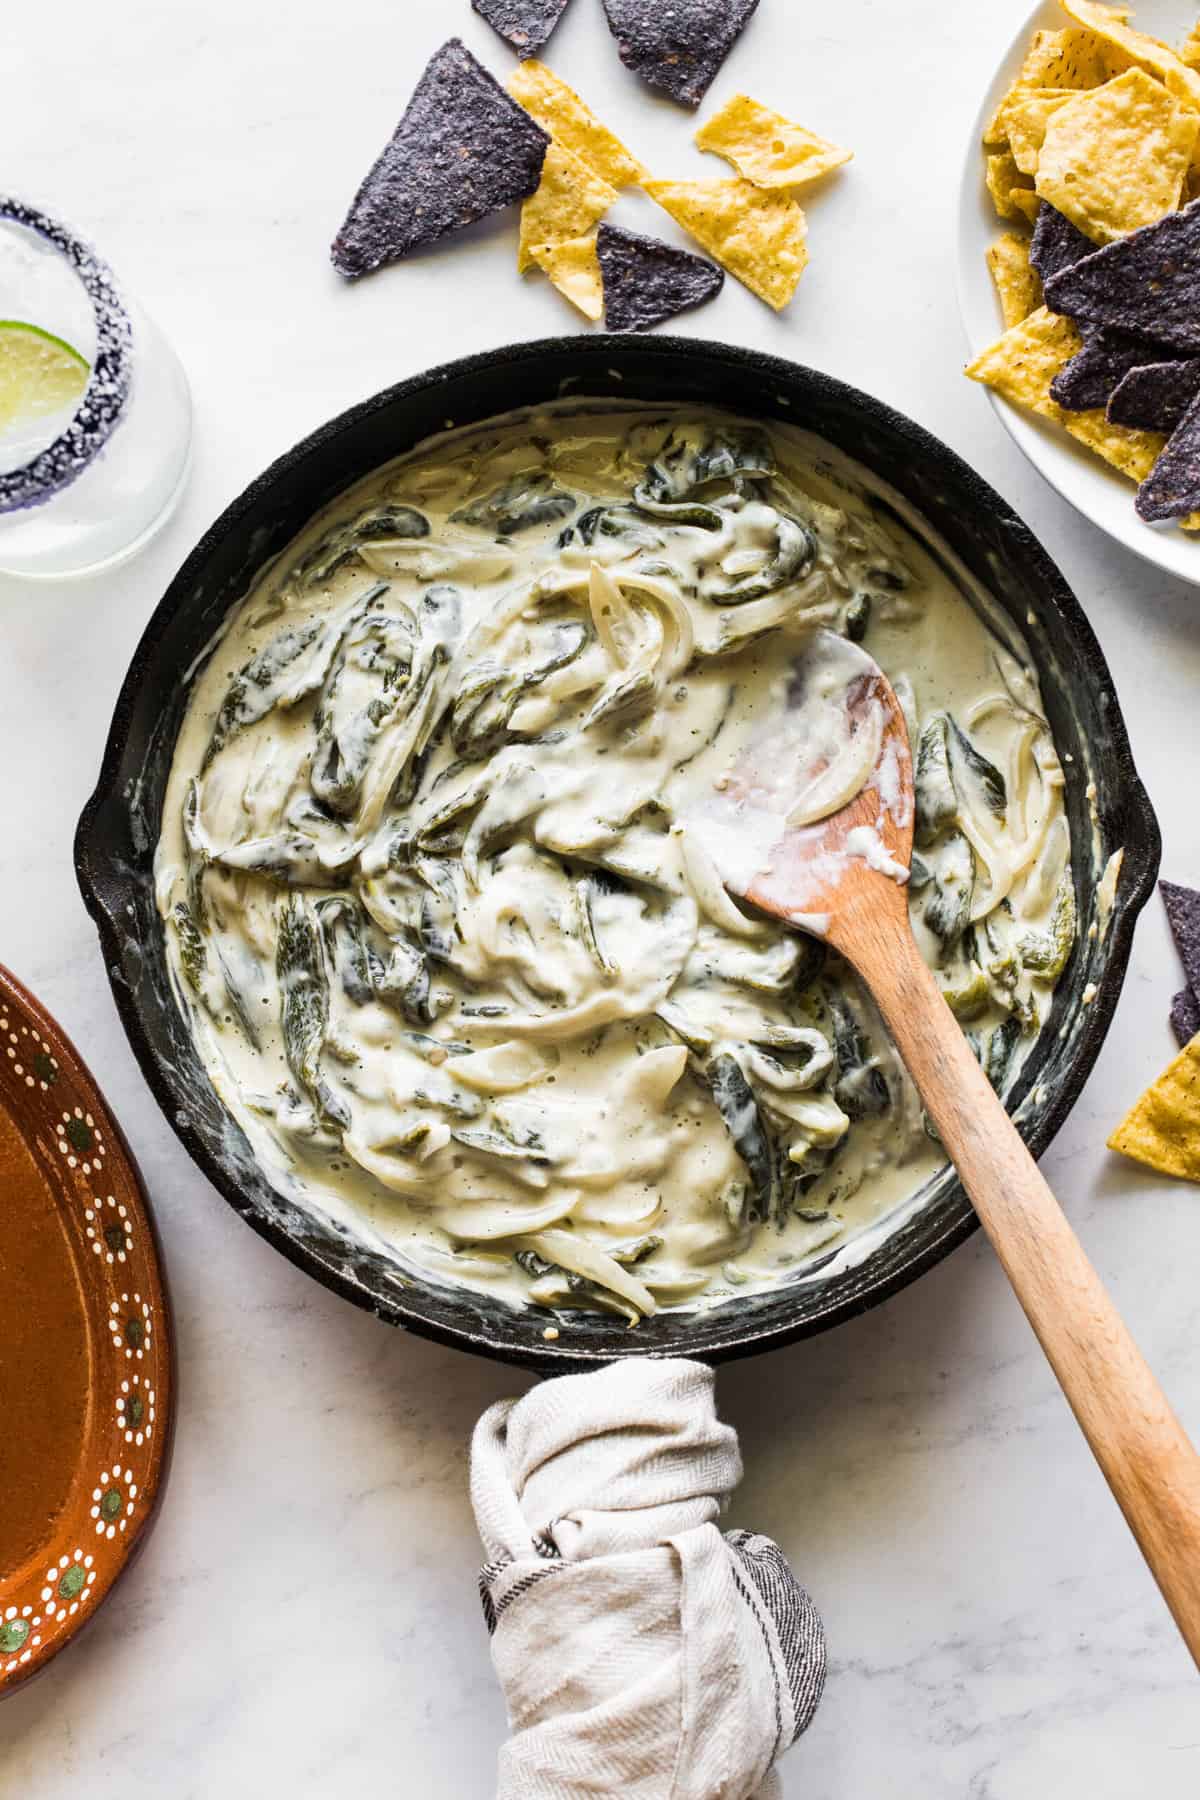 Rajas con crema in a skillet with tortilla chips.